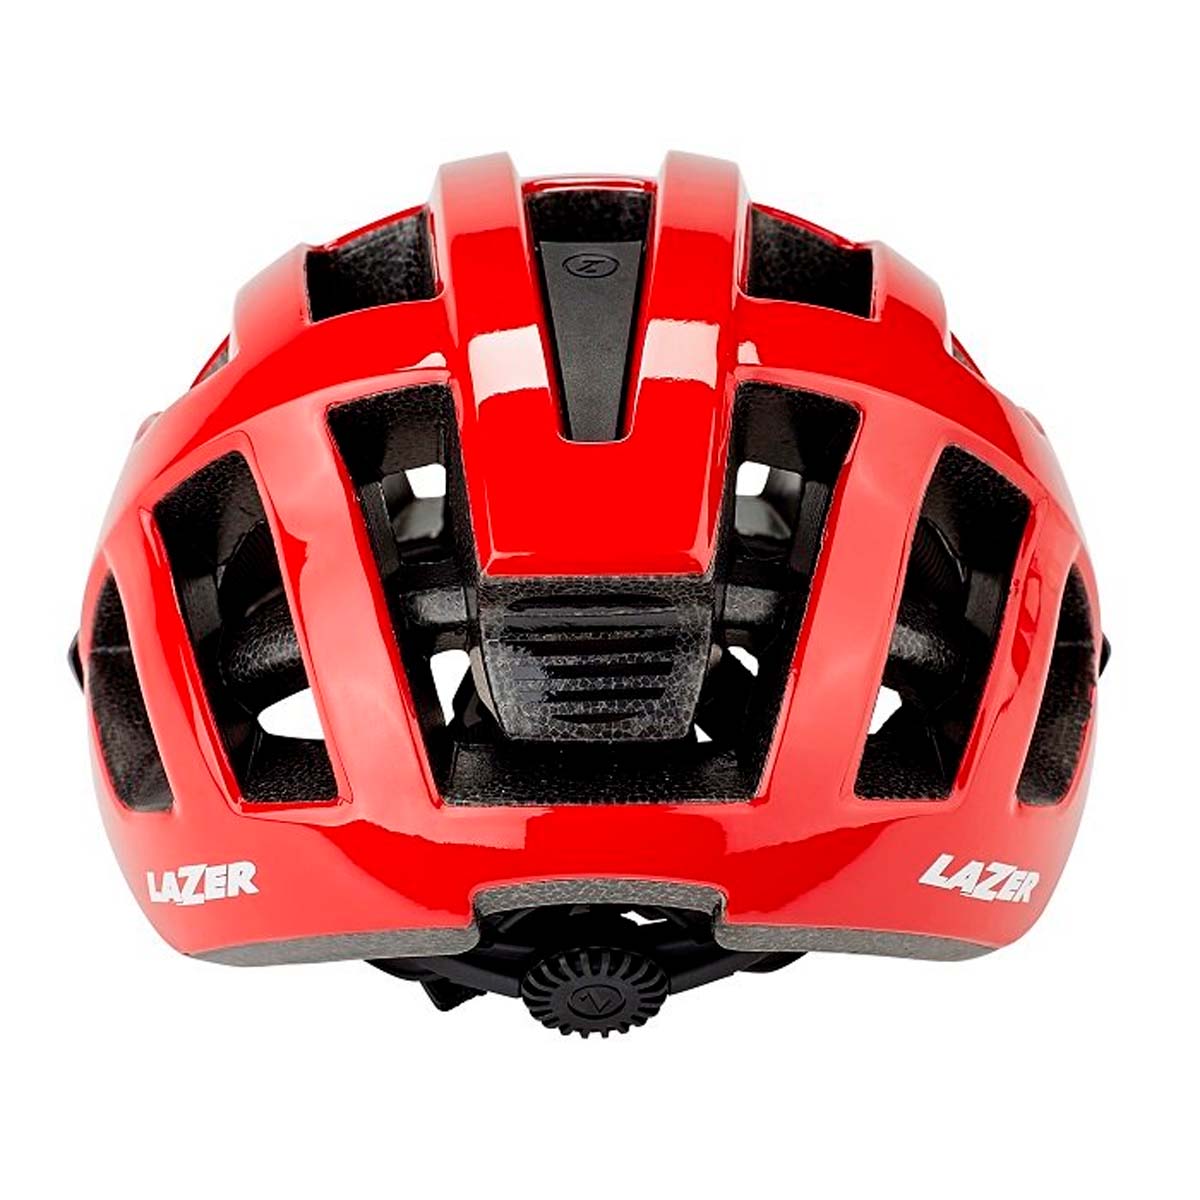 Capacete Lazer Compact Vermelho (54-61) In Mold Ciclismo - BLC